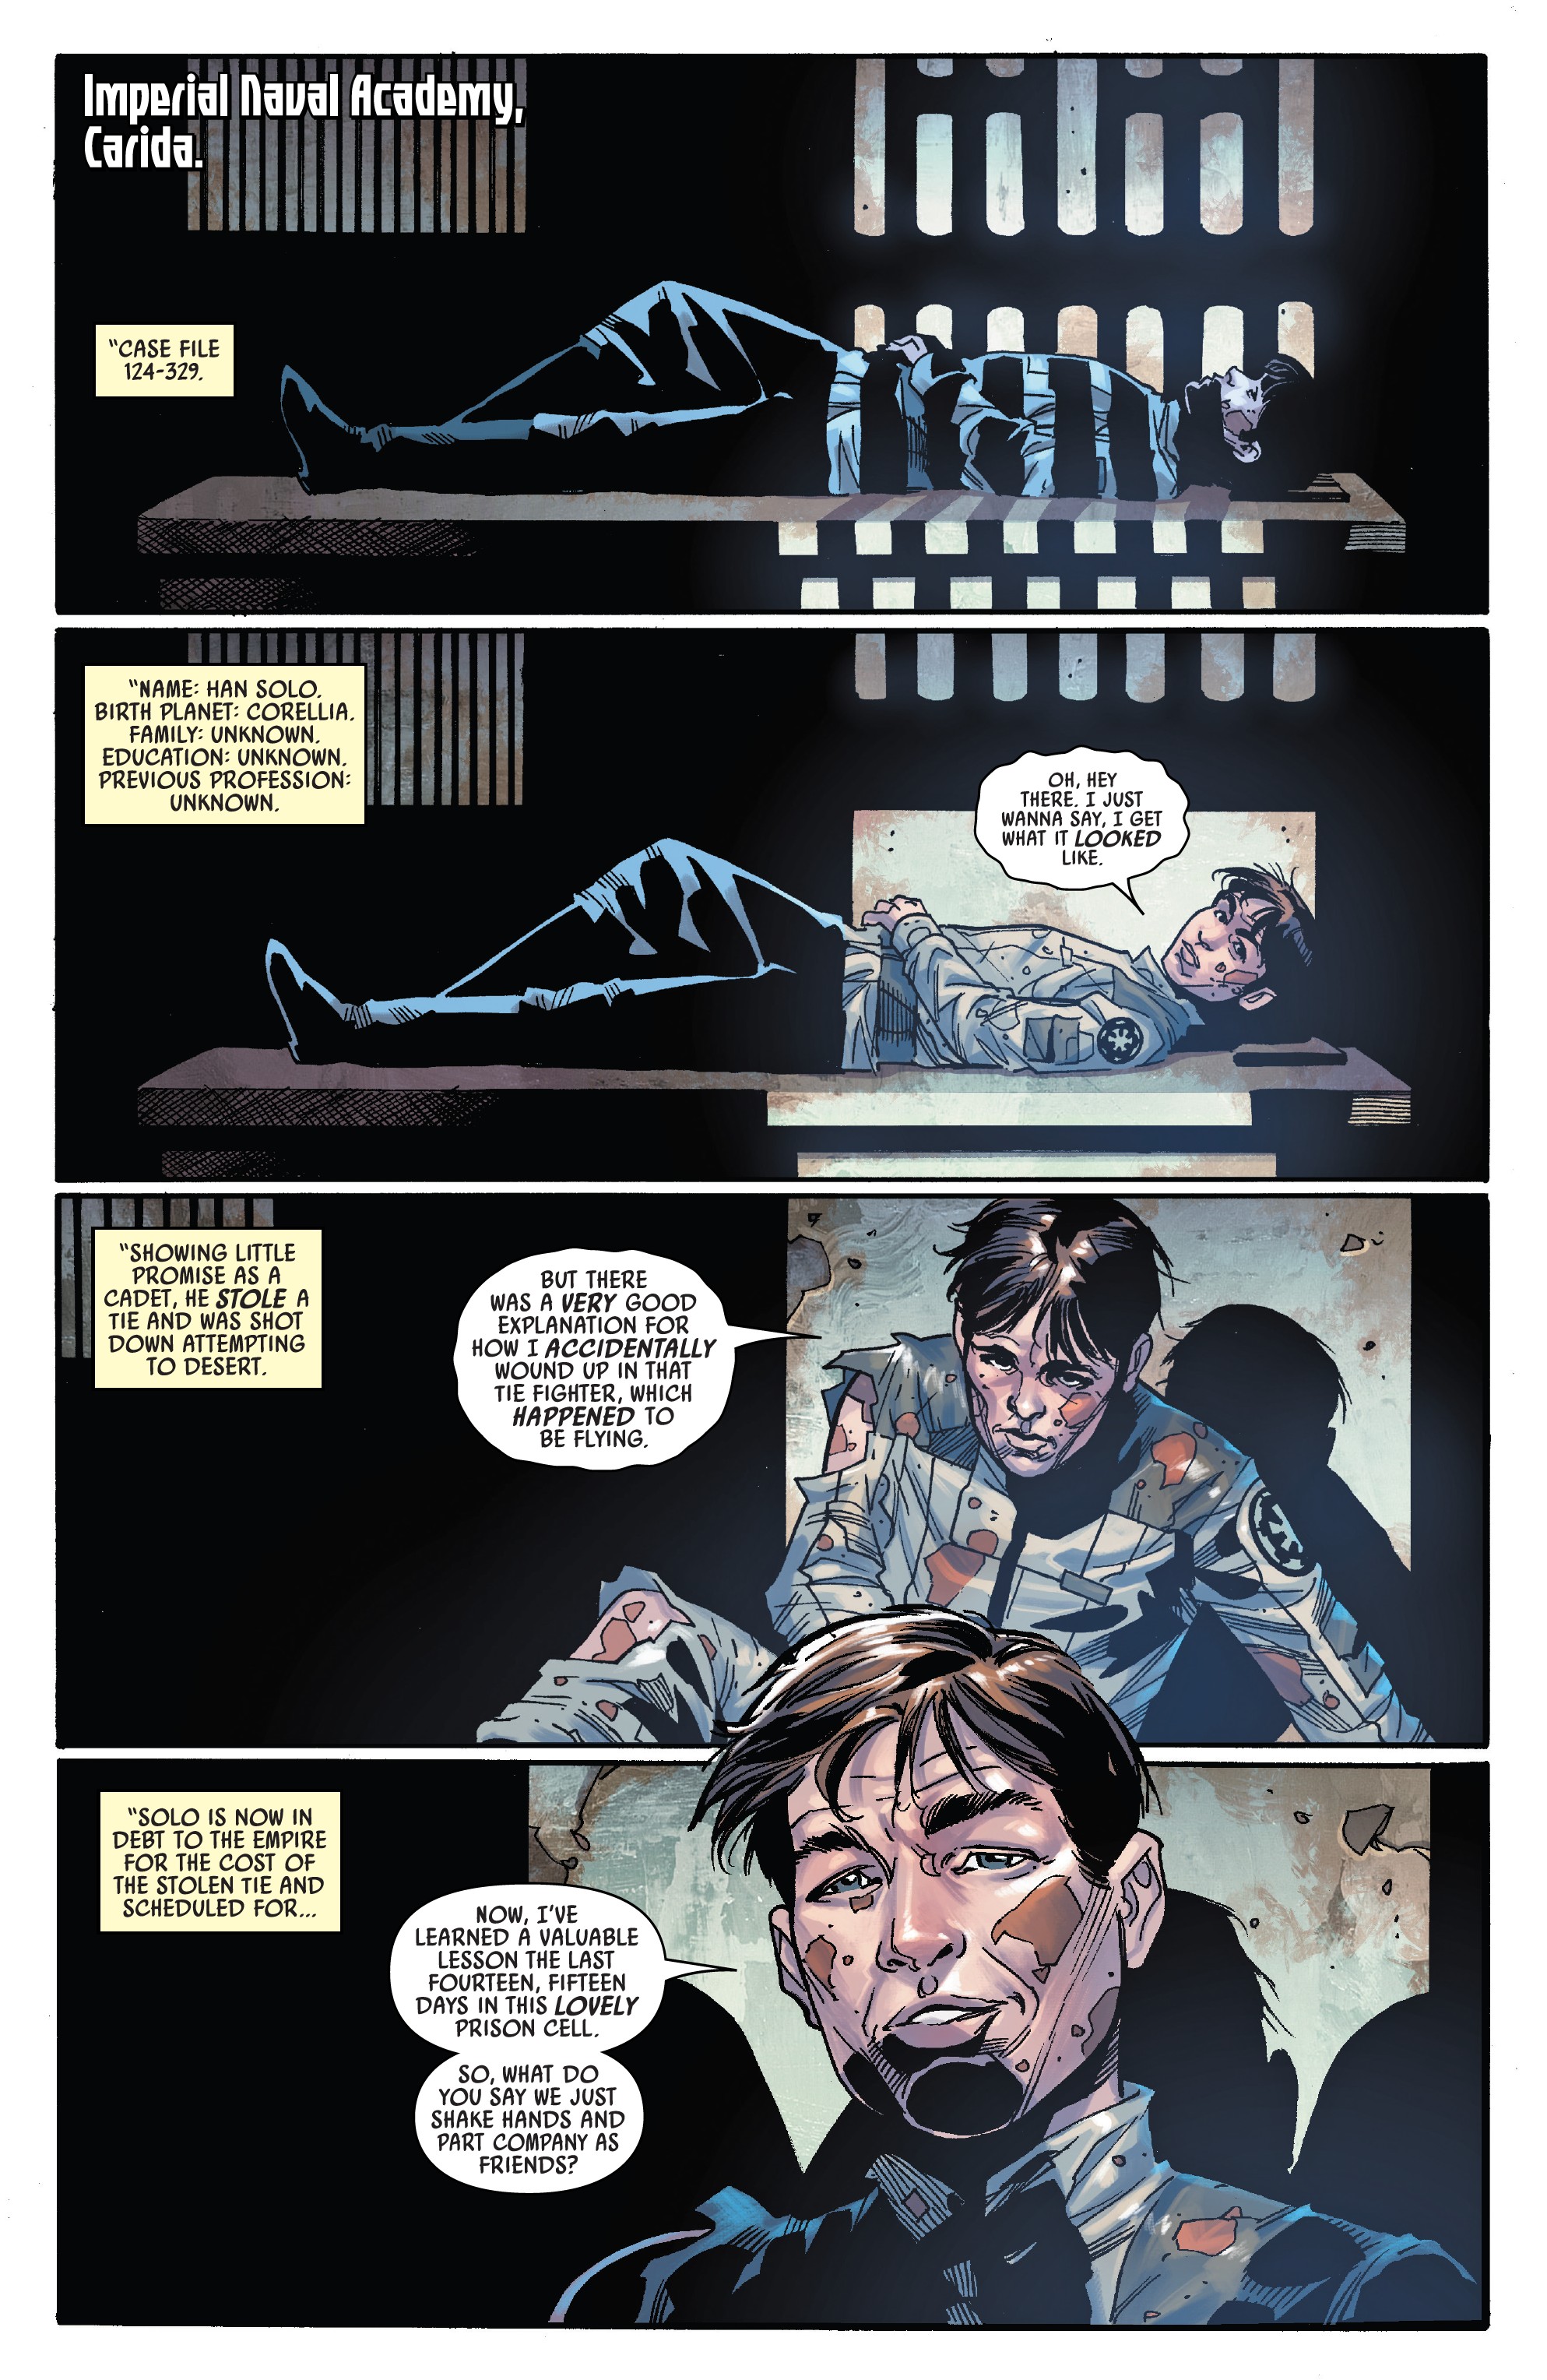 Star Wars: Han Solo - Imperial Cadet (2018-): Chapter 2 - Page 3